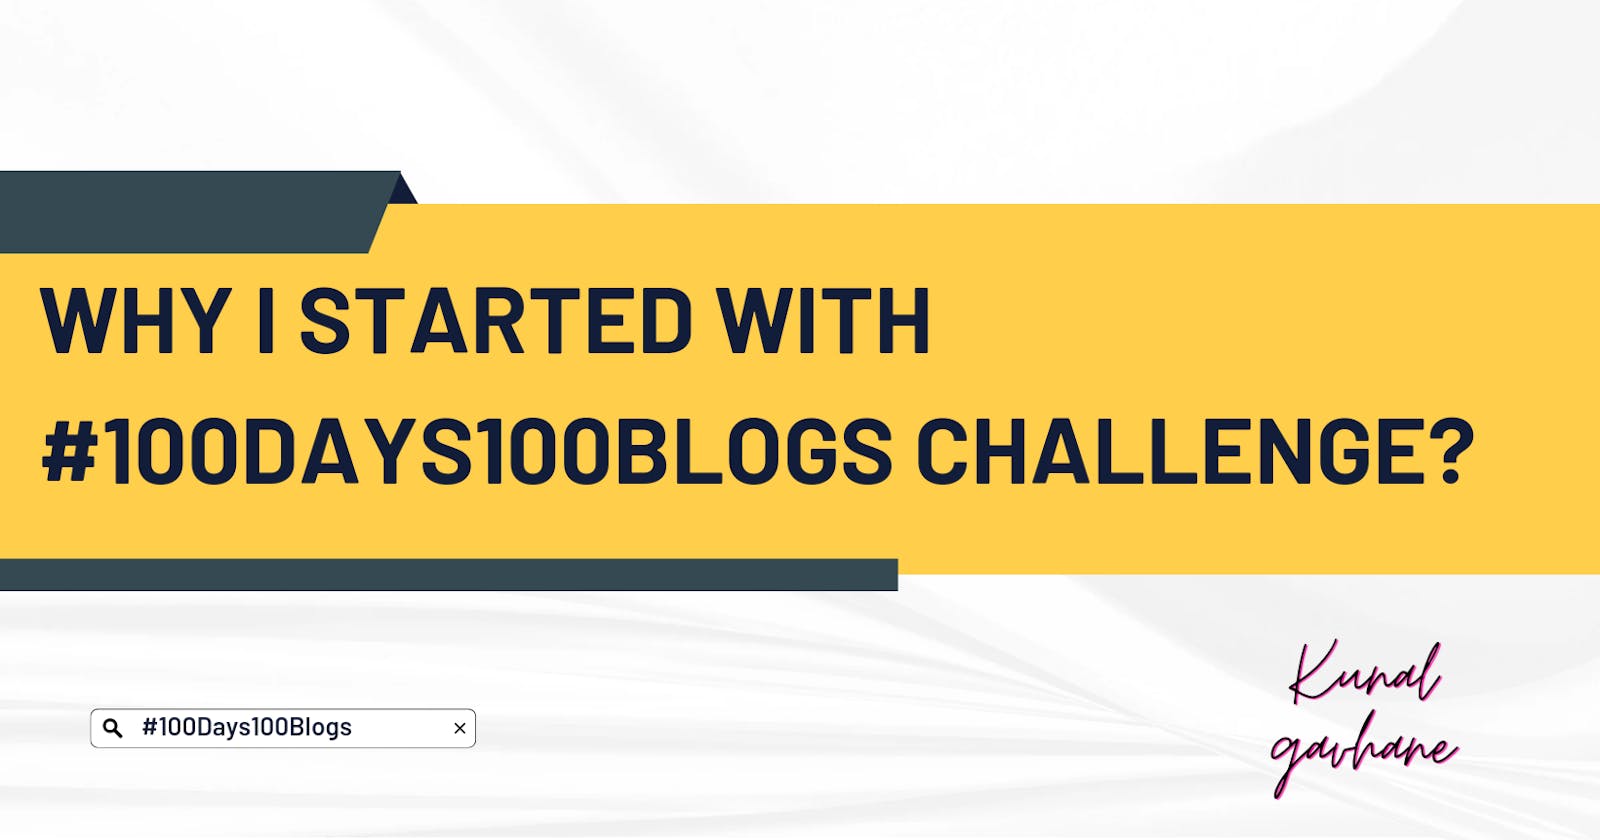 Why I started with #100Days100Blogs challenge?